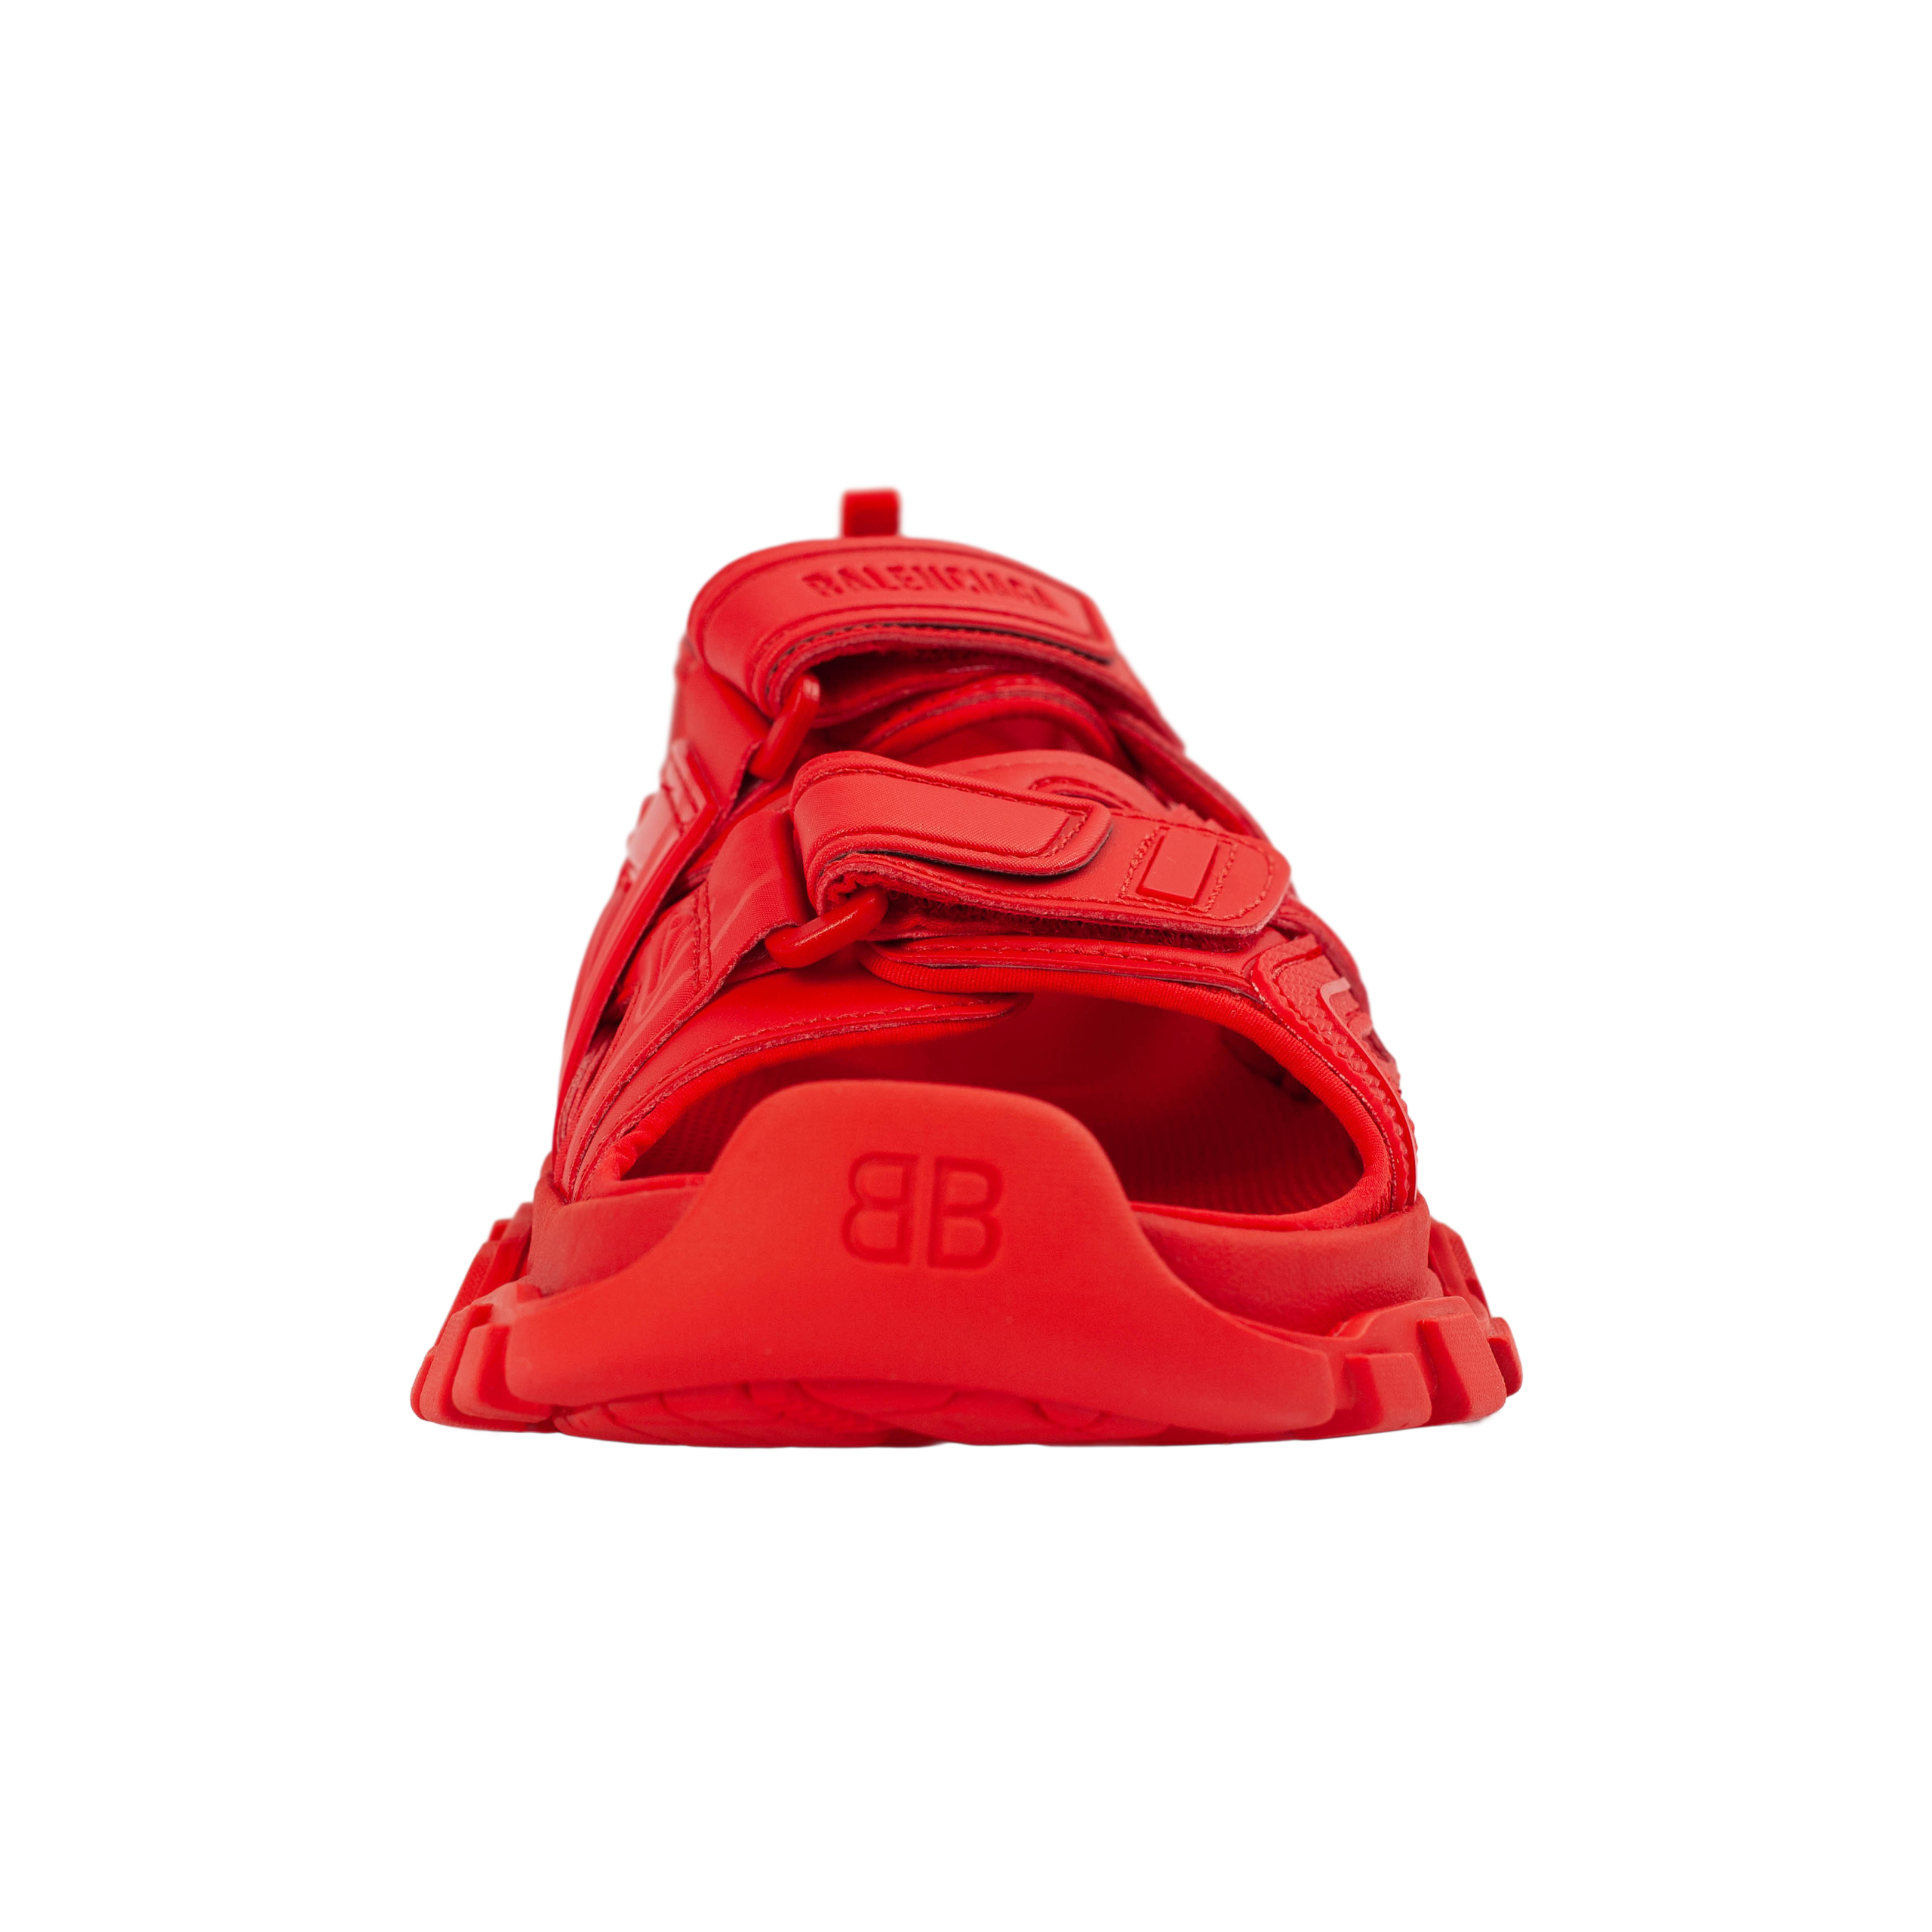 Buy Balenciaga women red track sandals for $930 online on SV77